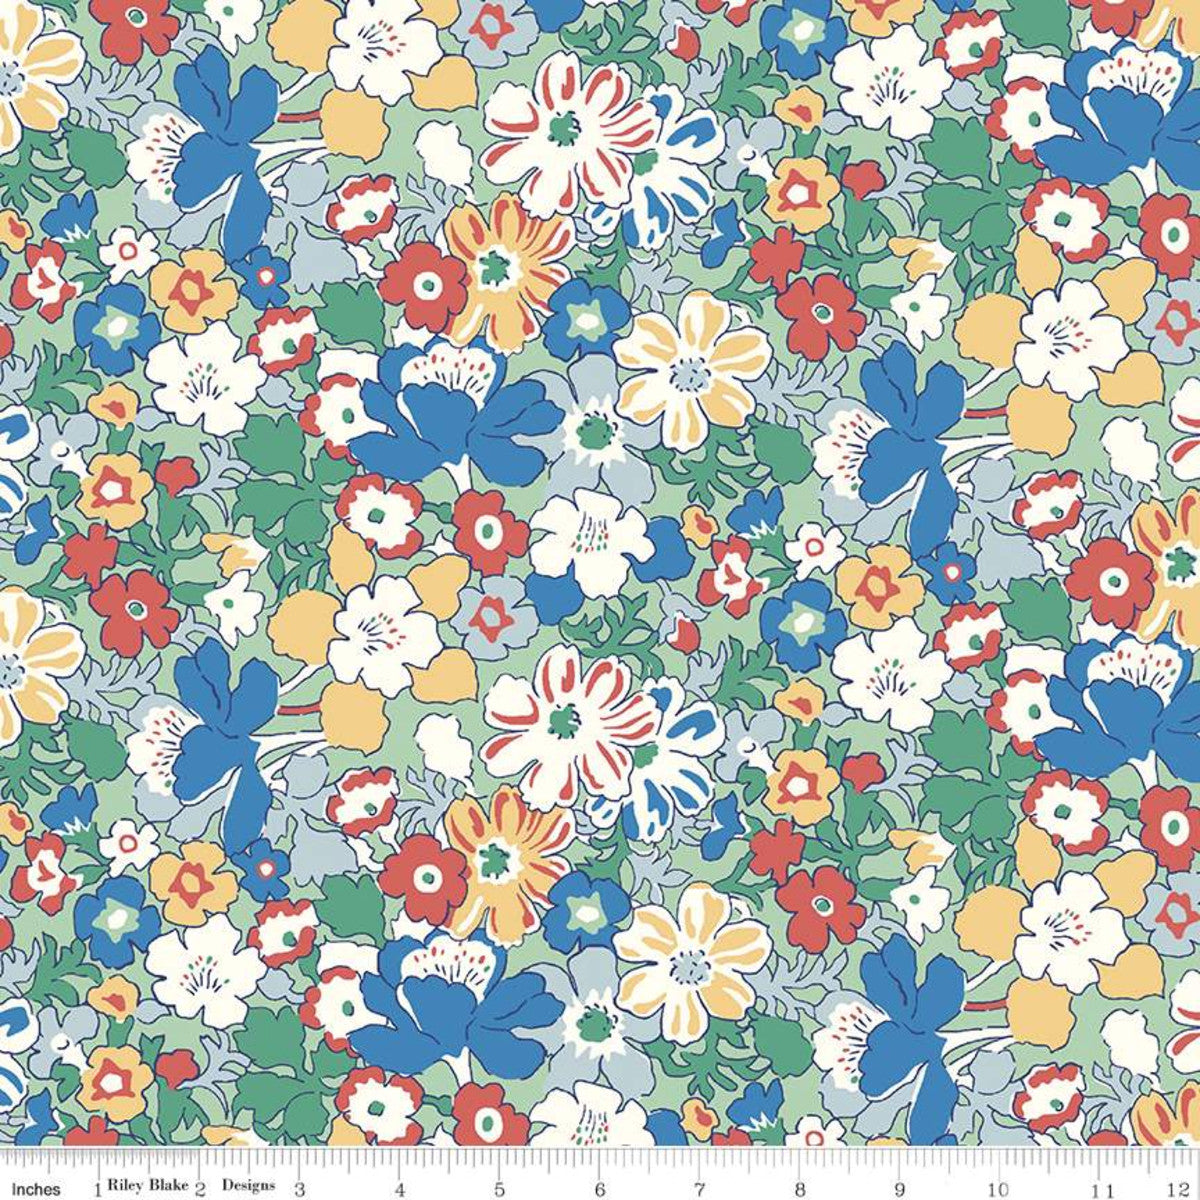 Carnaby Westbourne Posy D - Bohemian Brights - Liberty of London - Riley Blake Designs - yard fabric - quilting cotton